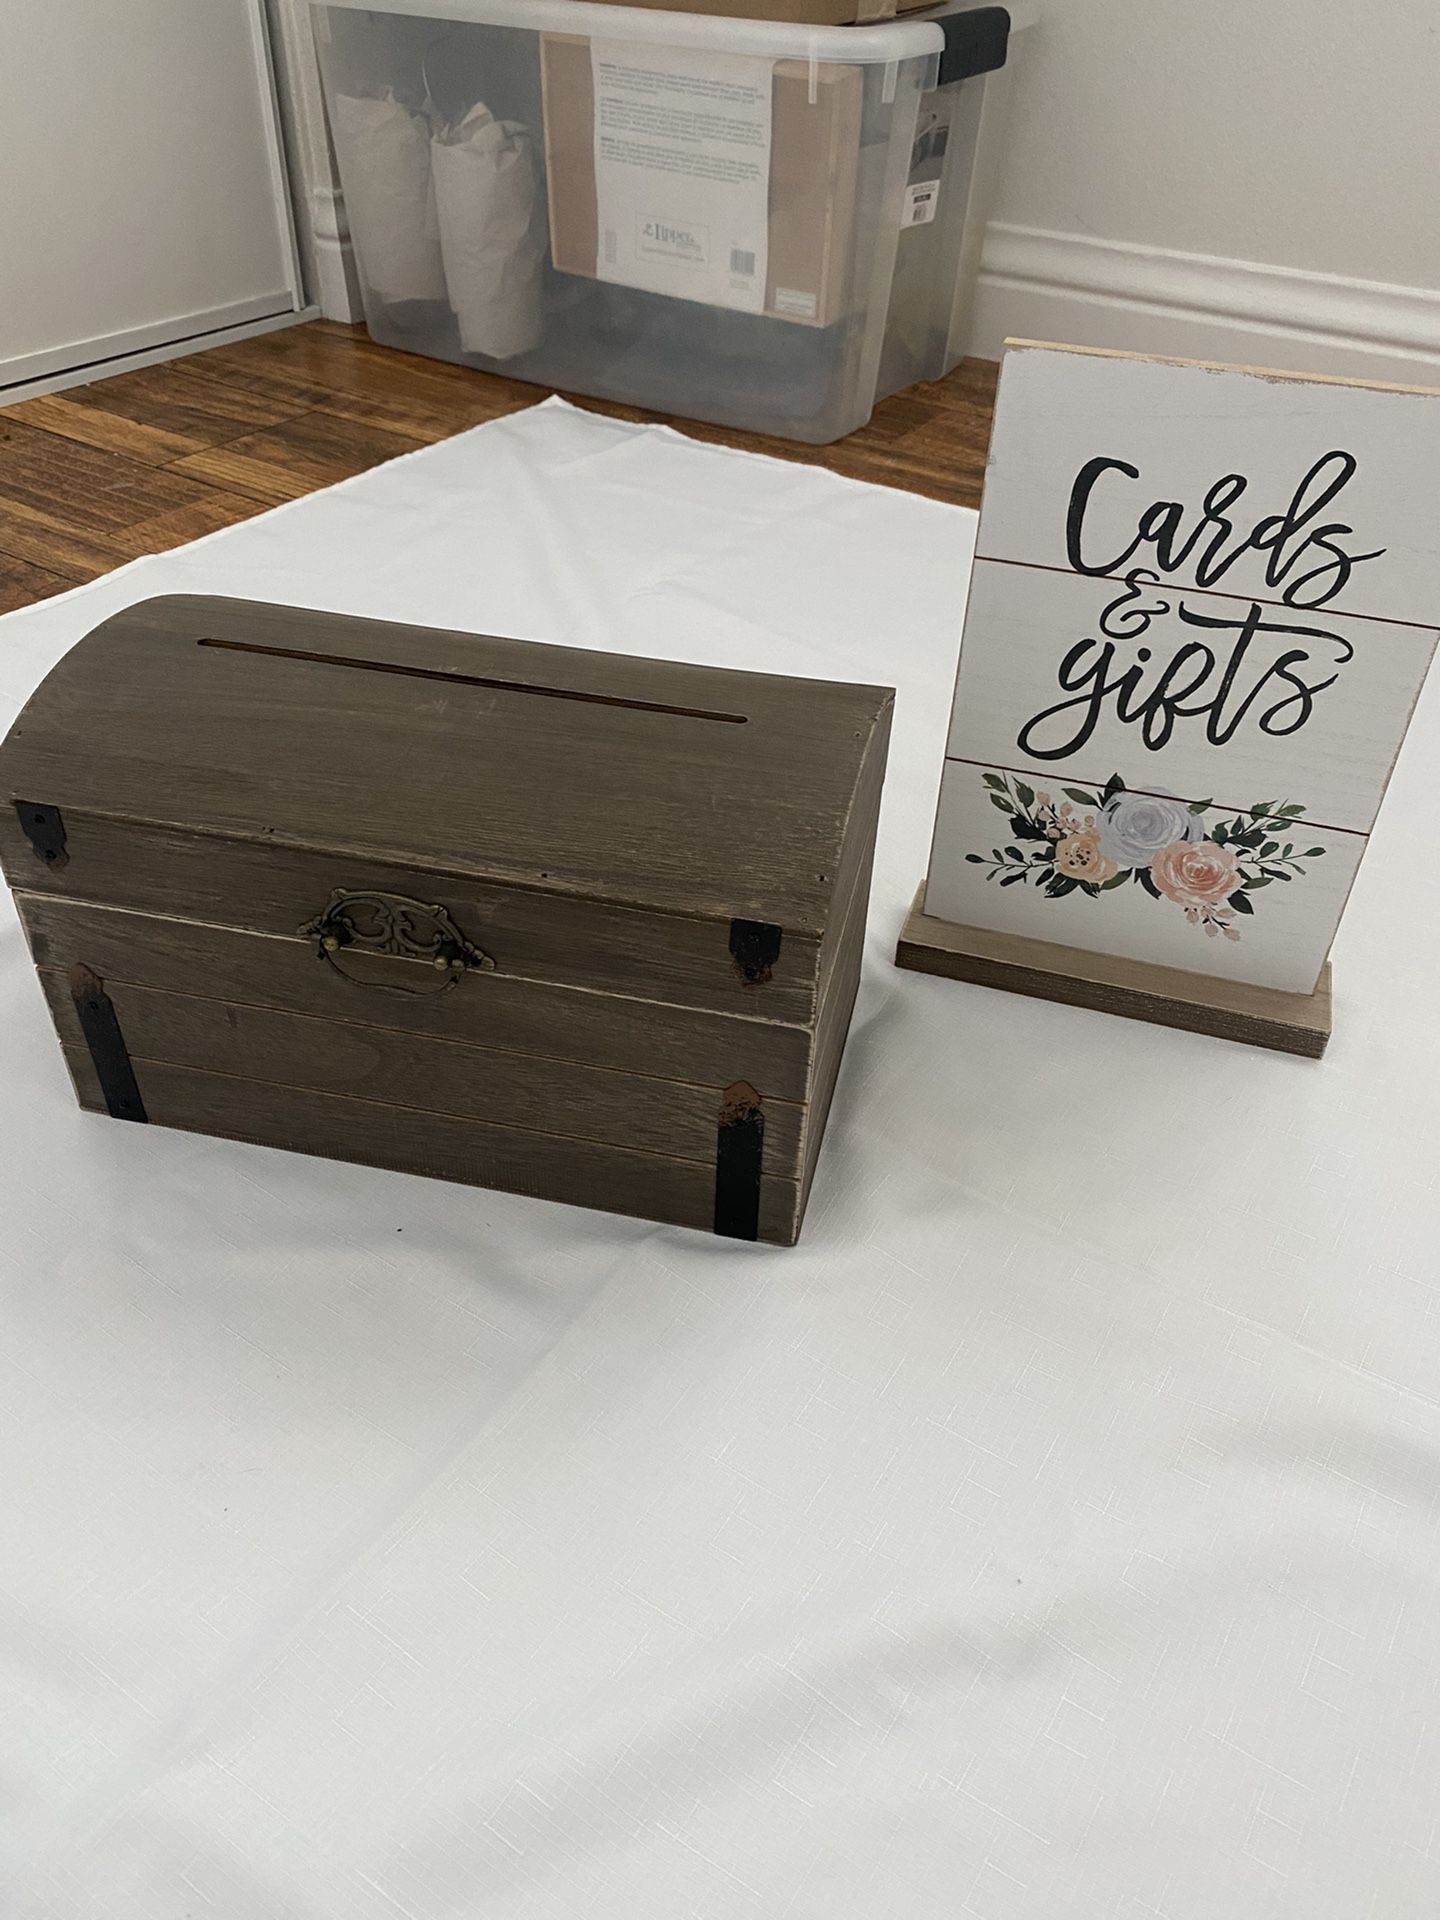 Wedding Cards & Gifts Box / Sign 